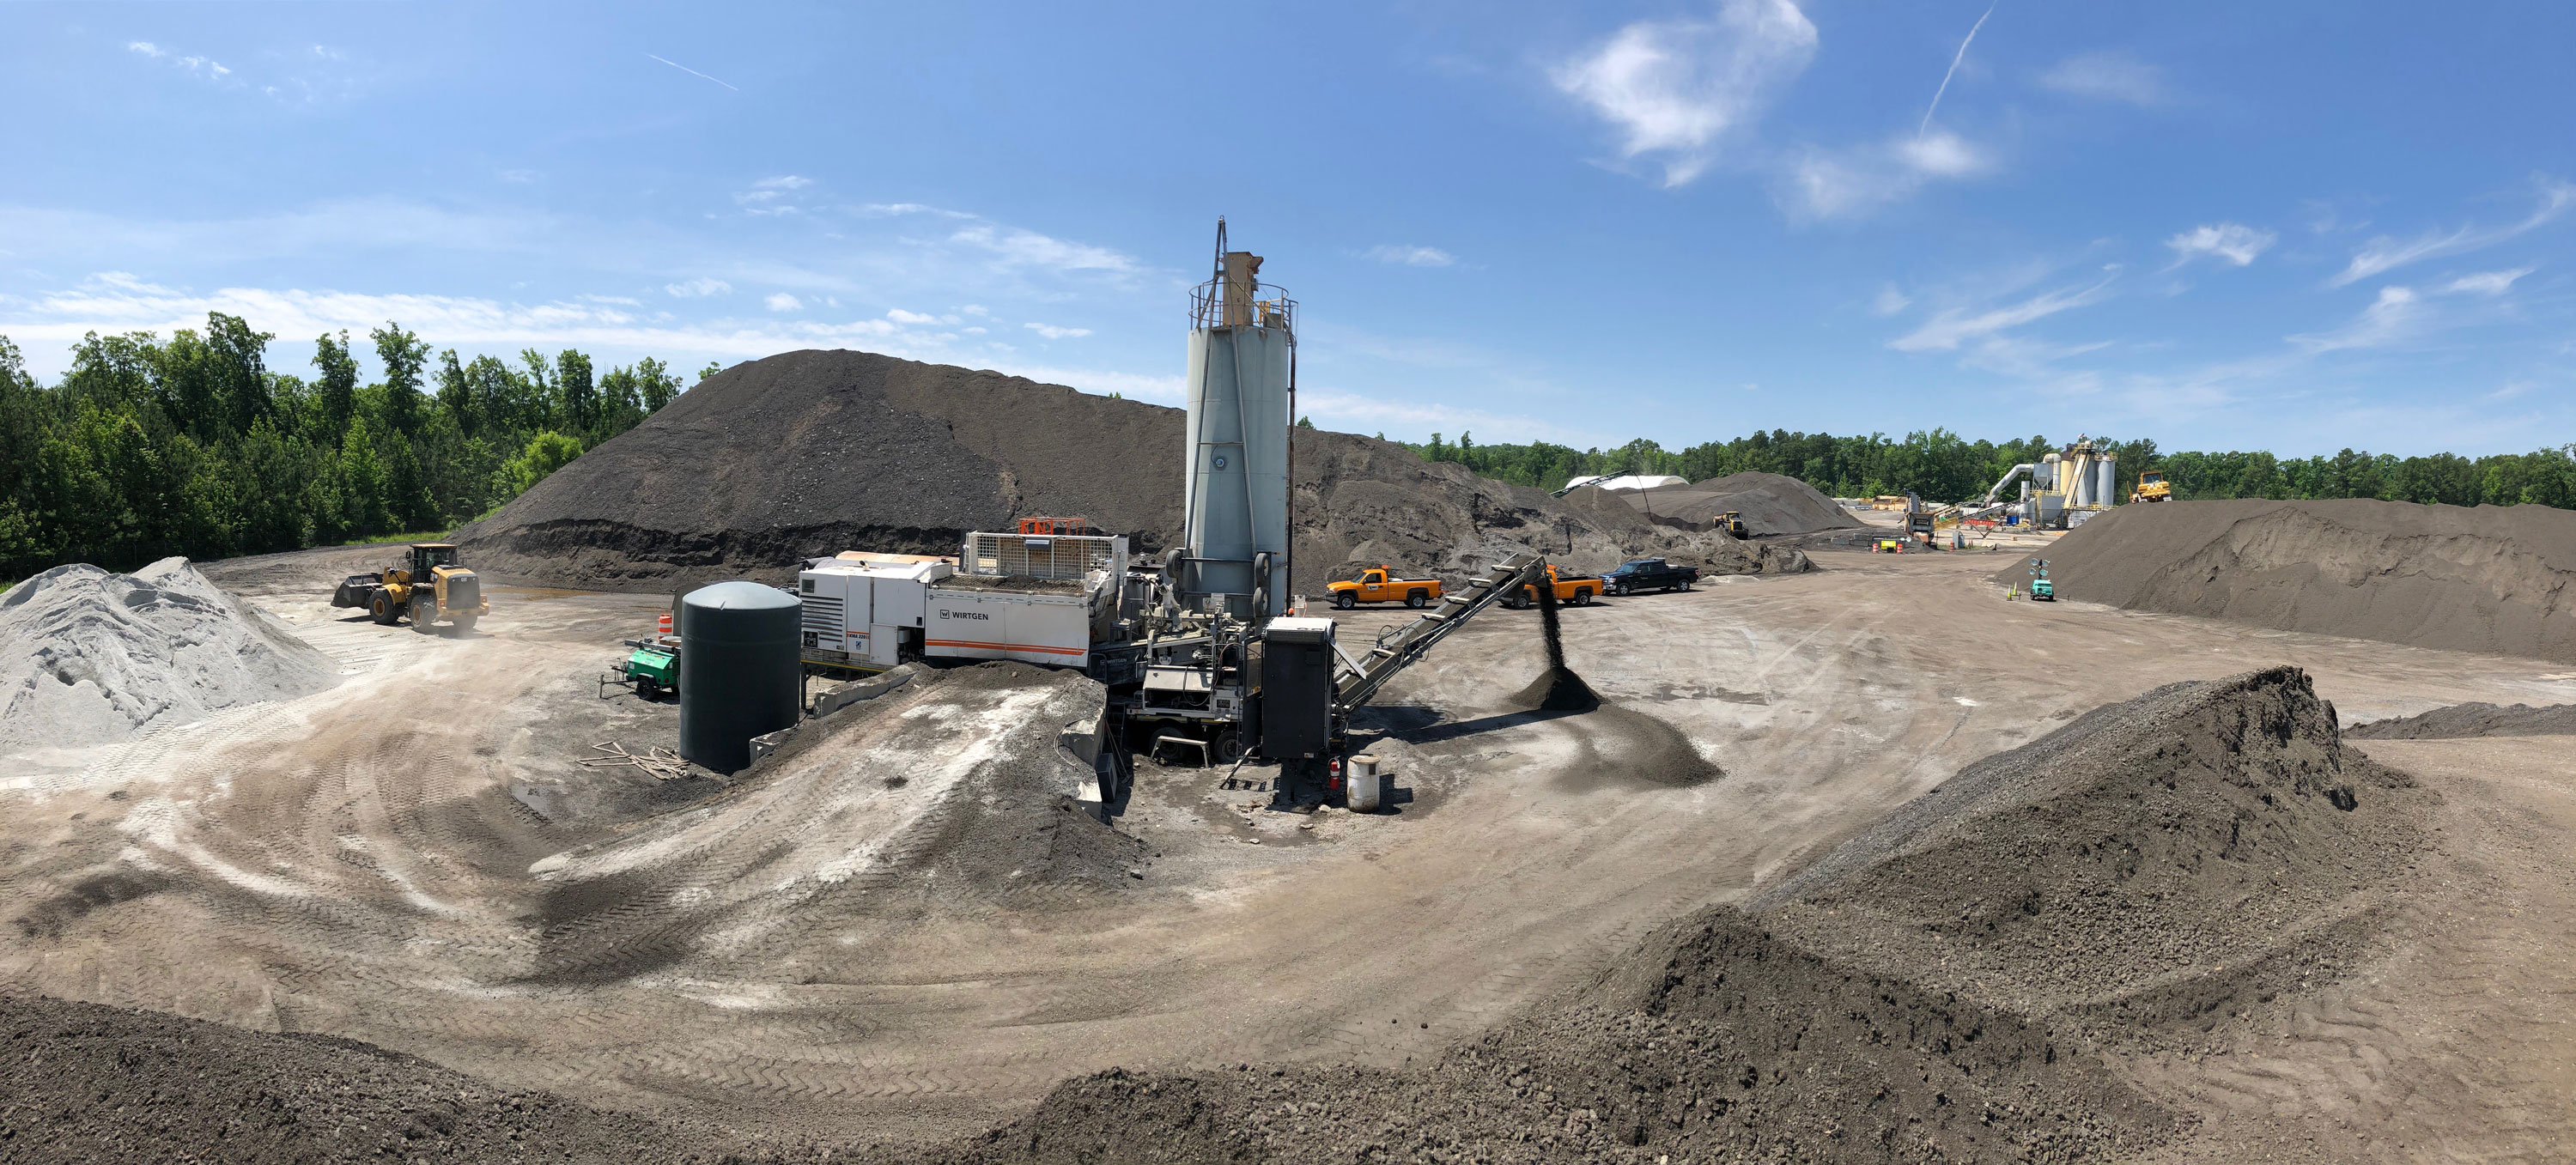 In cold central plant recycling, the asphalt recycling takes place at a central location using a stationary cold mix plant.